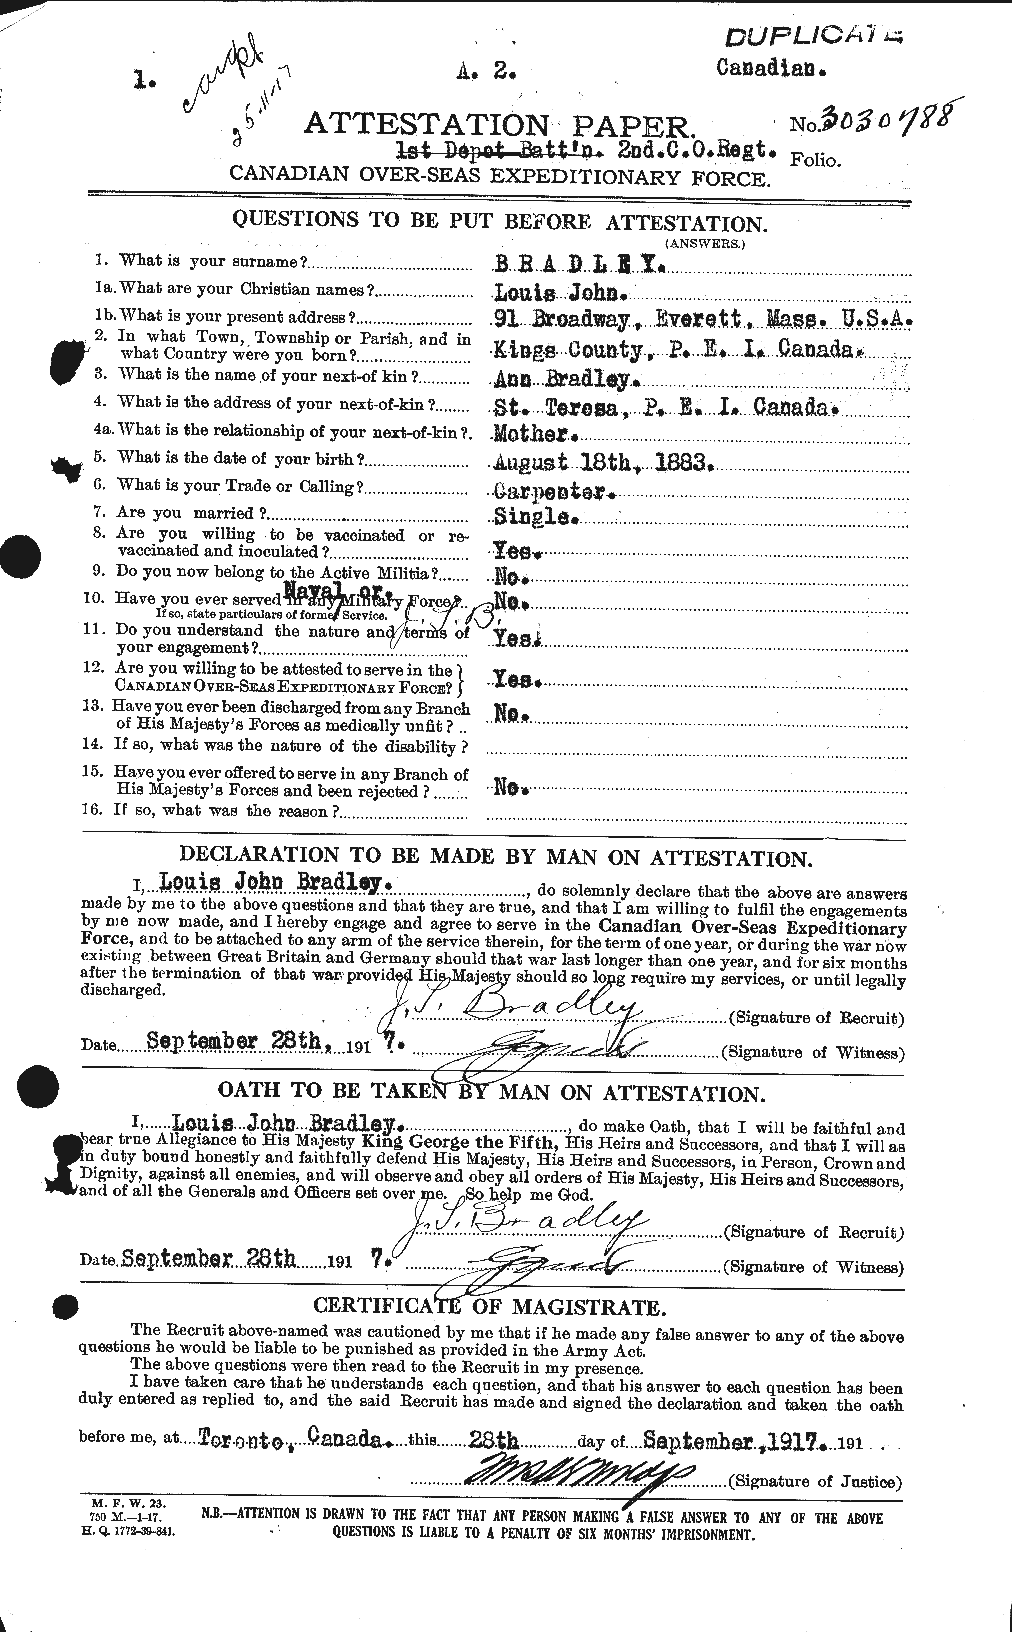 Personnel Records of the First World War - CEF 259044a